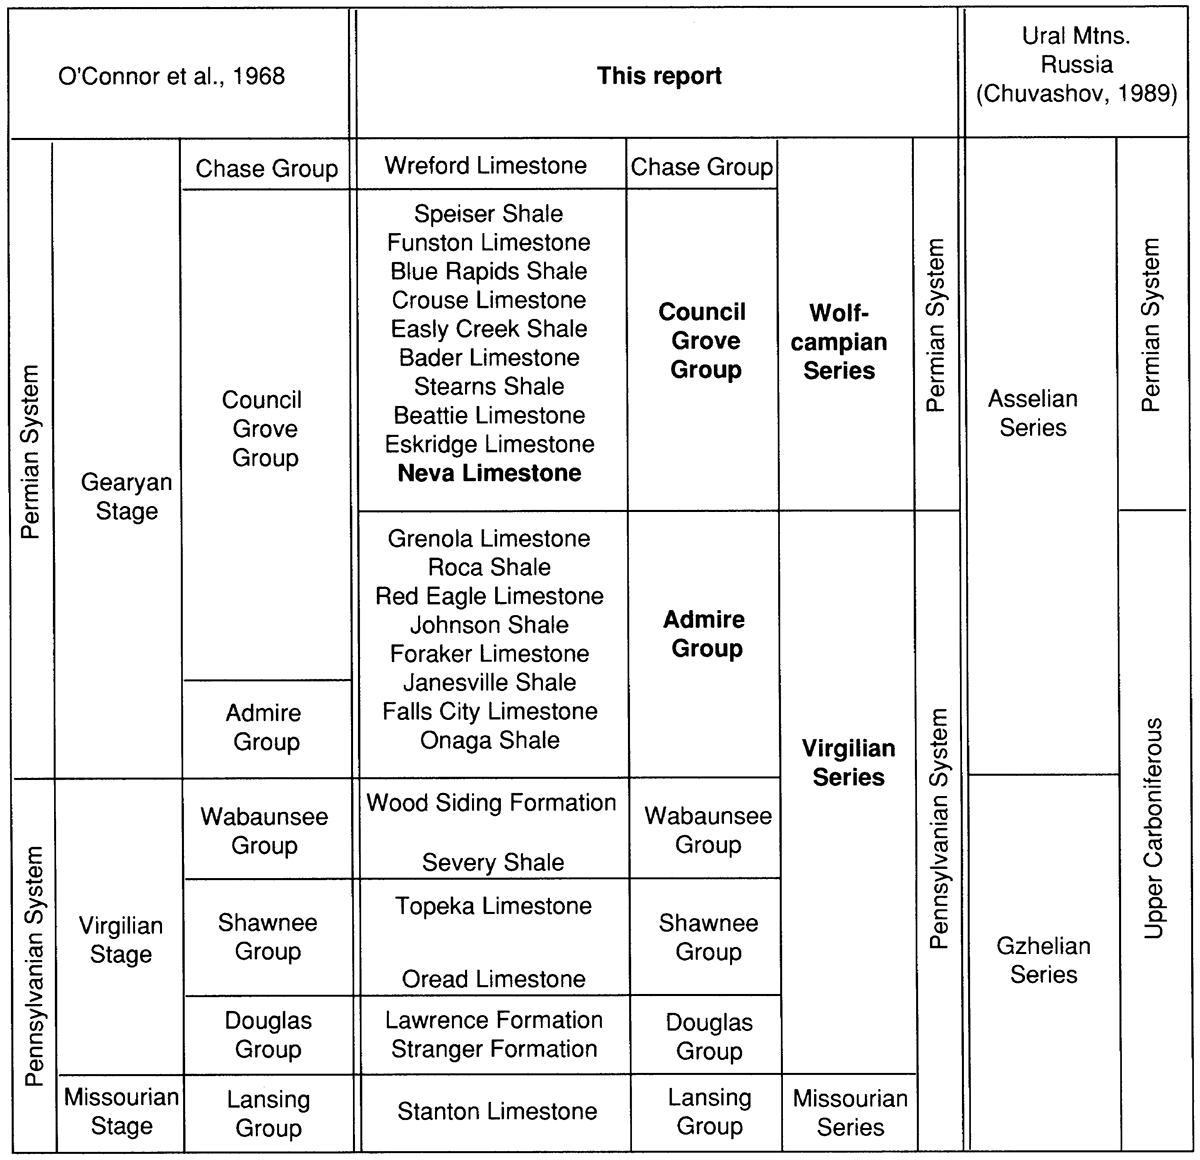 Stratigraphic column showing previous assignments under the column labelled O'Connor et al., 1968, compared with the proposed usage of this report, relative to generally accepted standard Russian terminology.